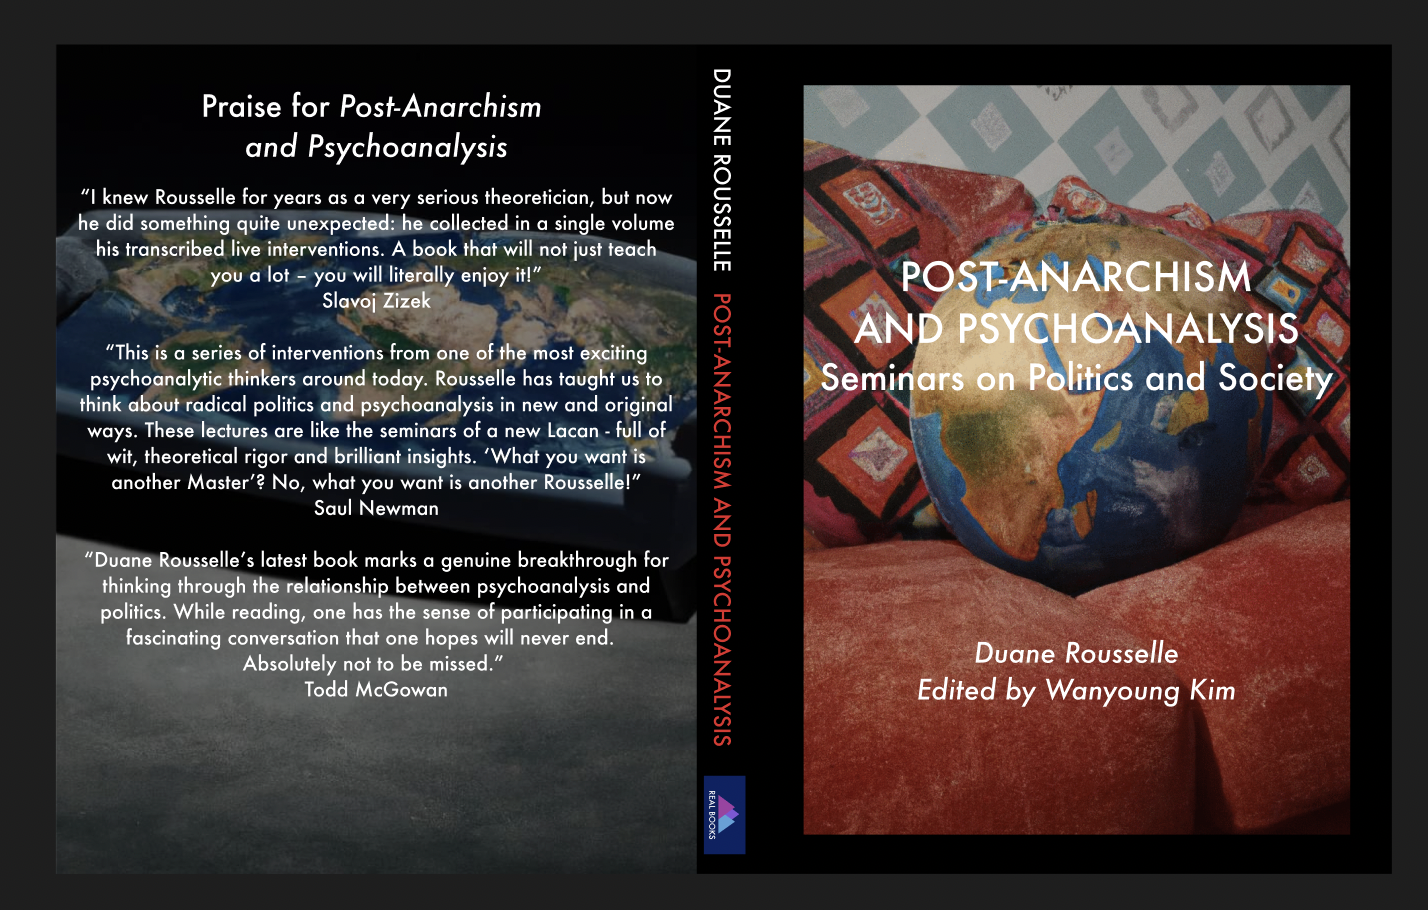 Seminars on Post-Anarchism and Psychoanalysis by Duane Rousselle